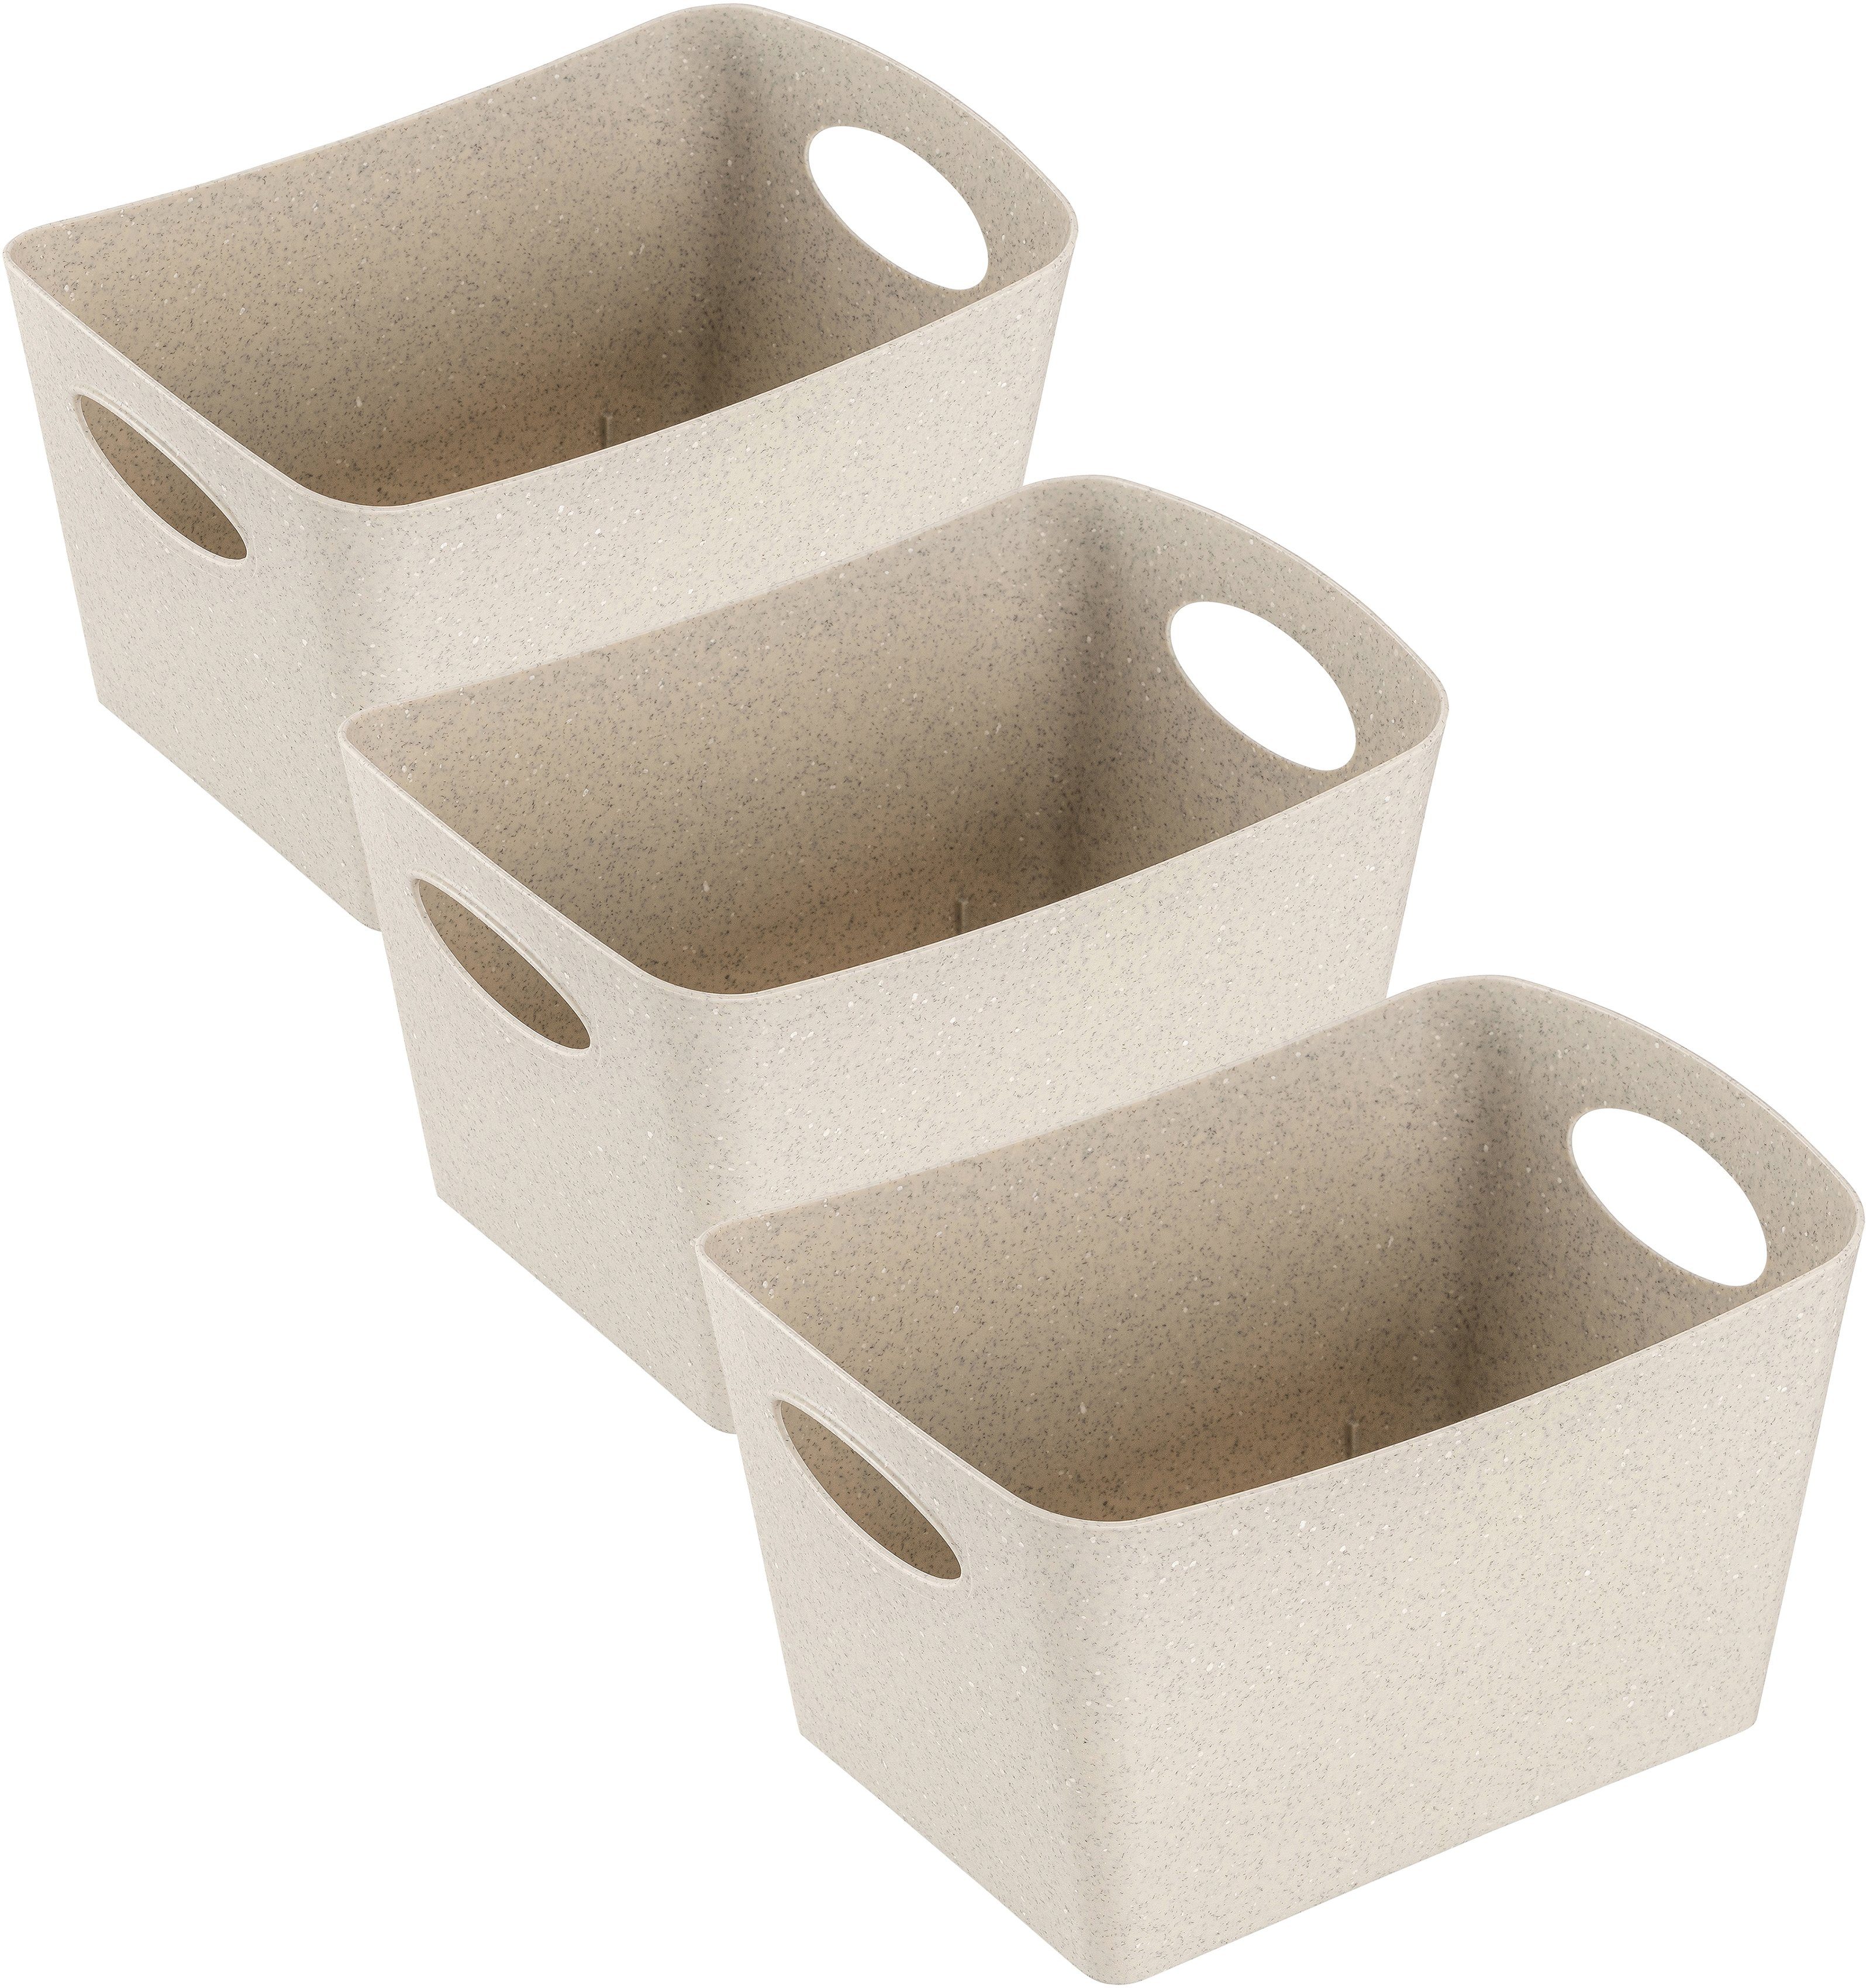 KOZIOL Organizer BOXXX S (Set, 3 St), Aufbewahrungsbox, Made in Germany, 100% recyceltes Material, 1 Liter recycled desert sand